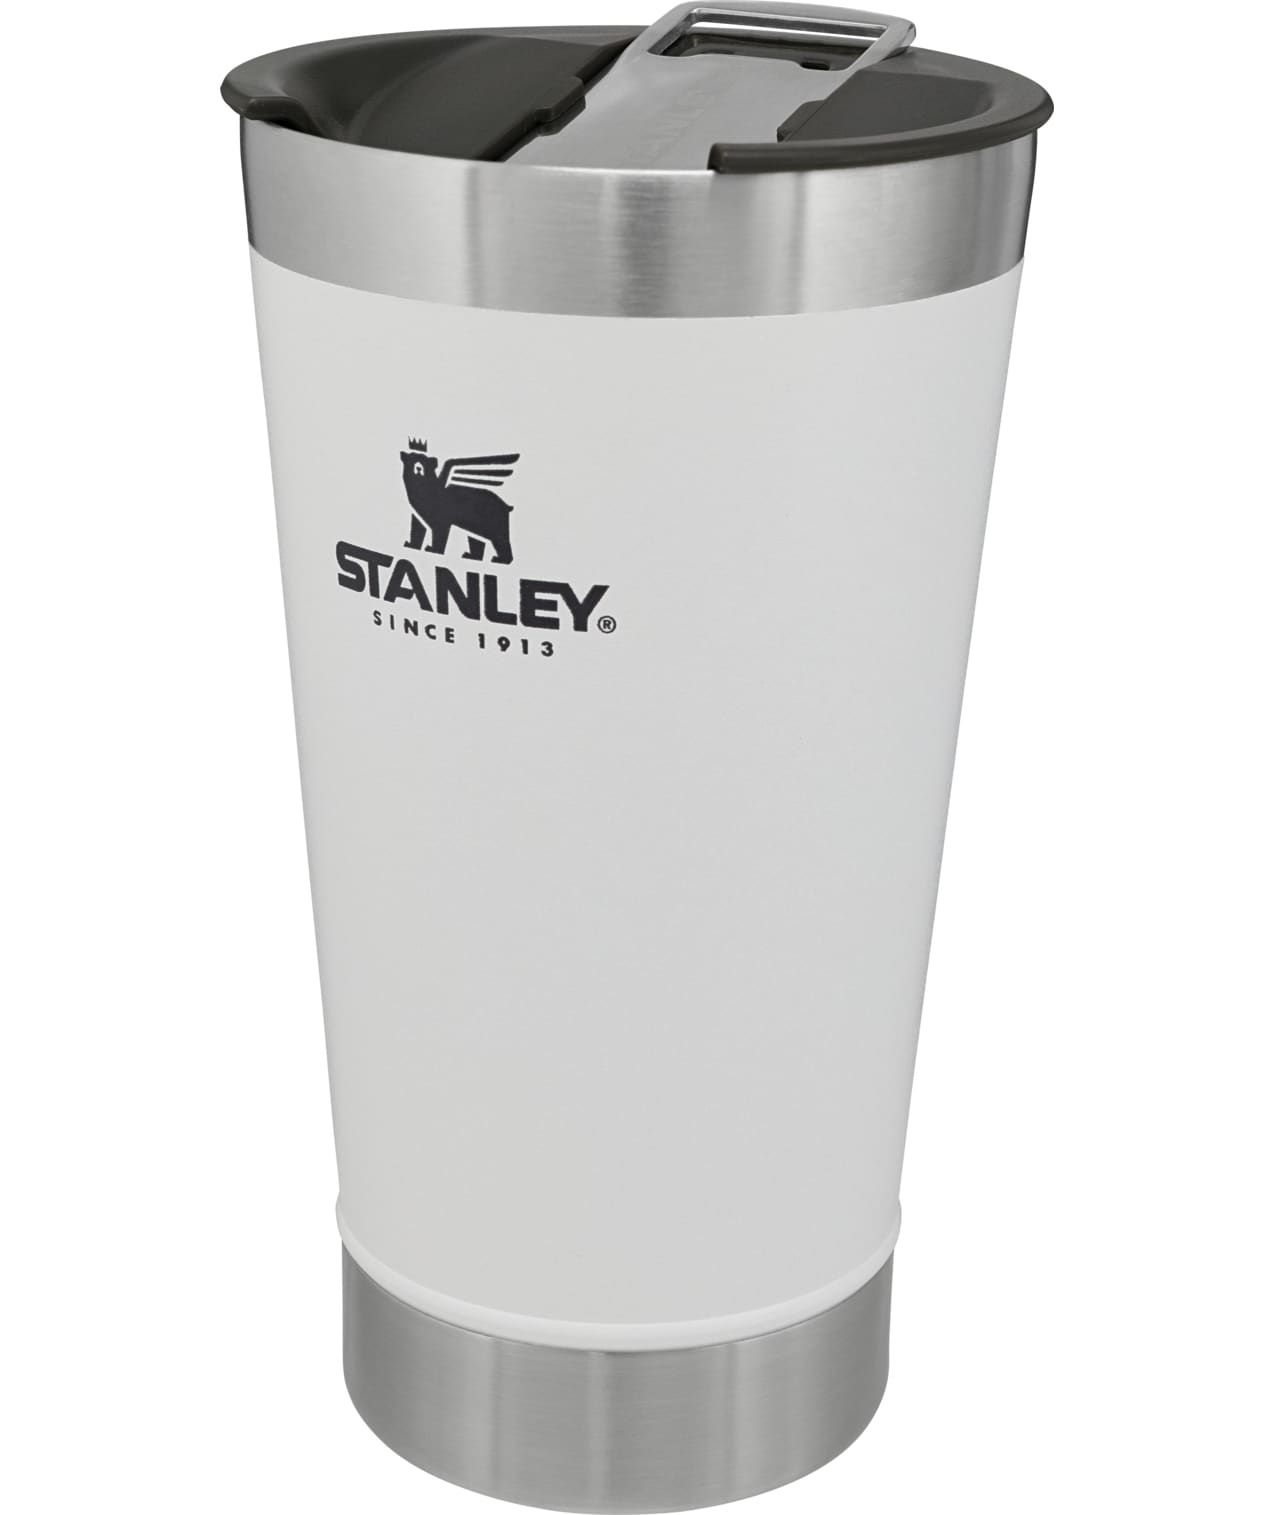 Stanley Classic Beer Stein with Bottle Opener 24 oz Insulated